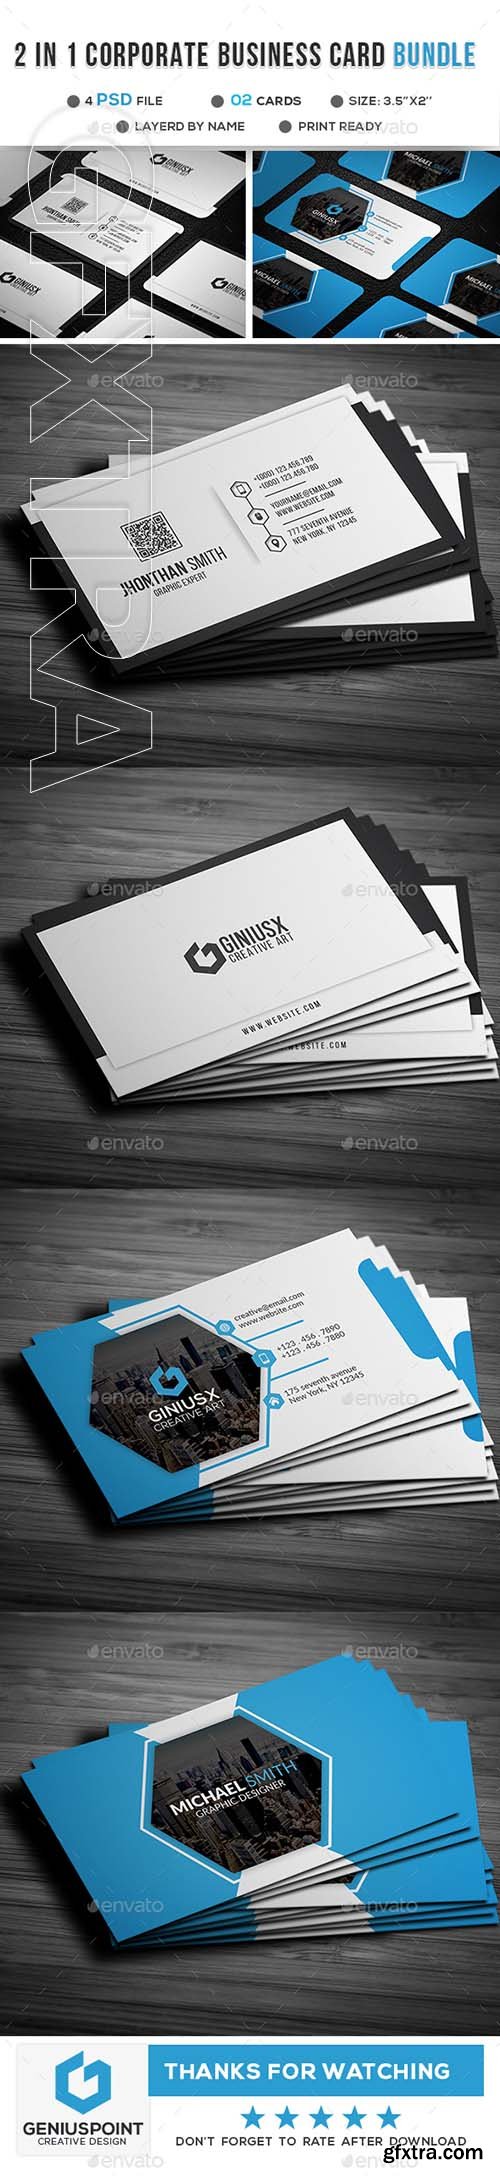 GraphicRiver - 2 in 1 Corporate Business Card 21889670